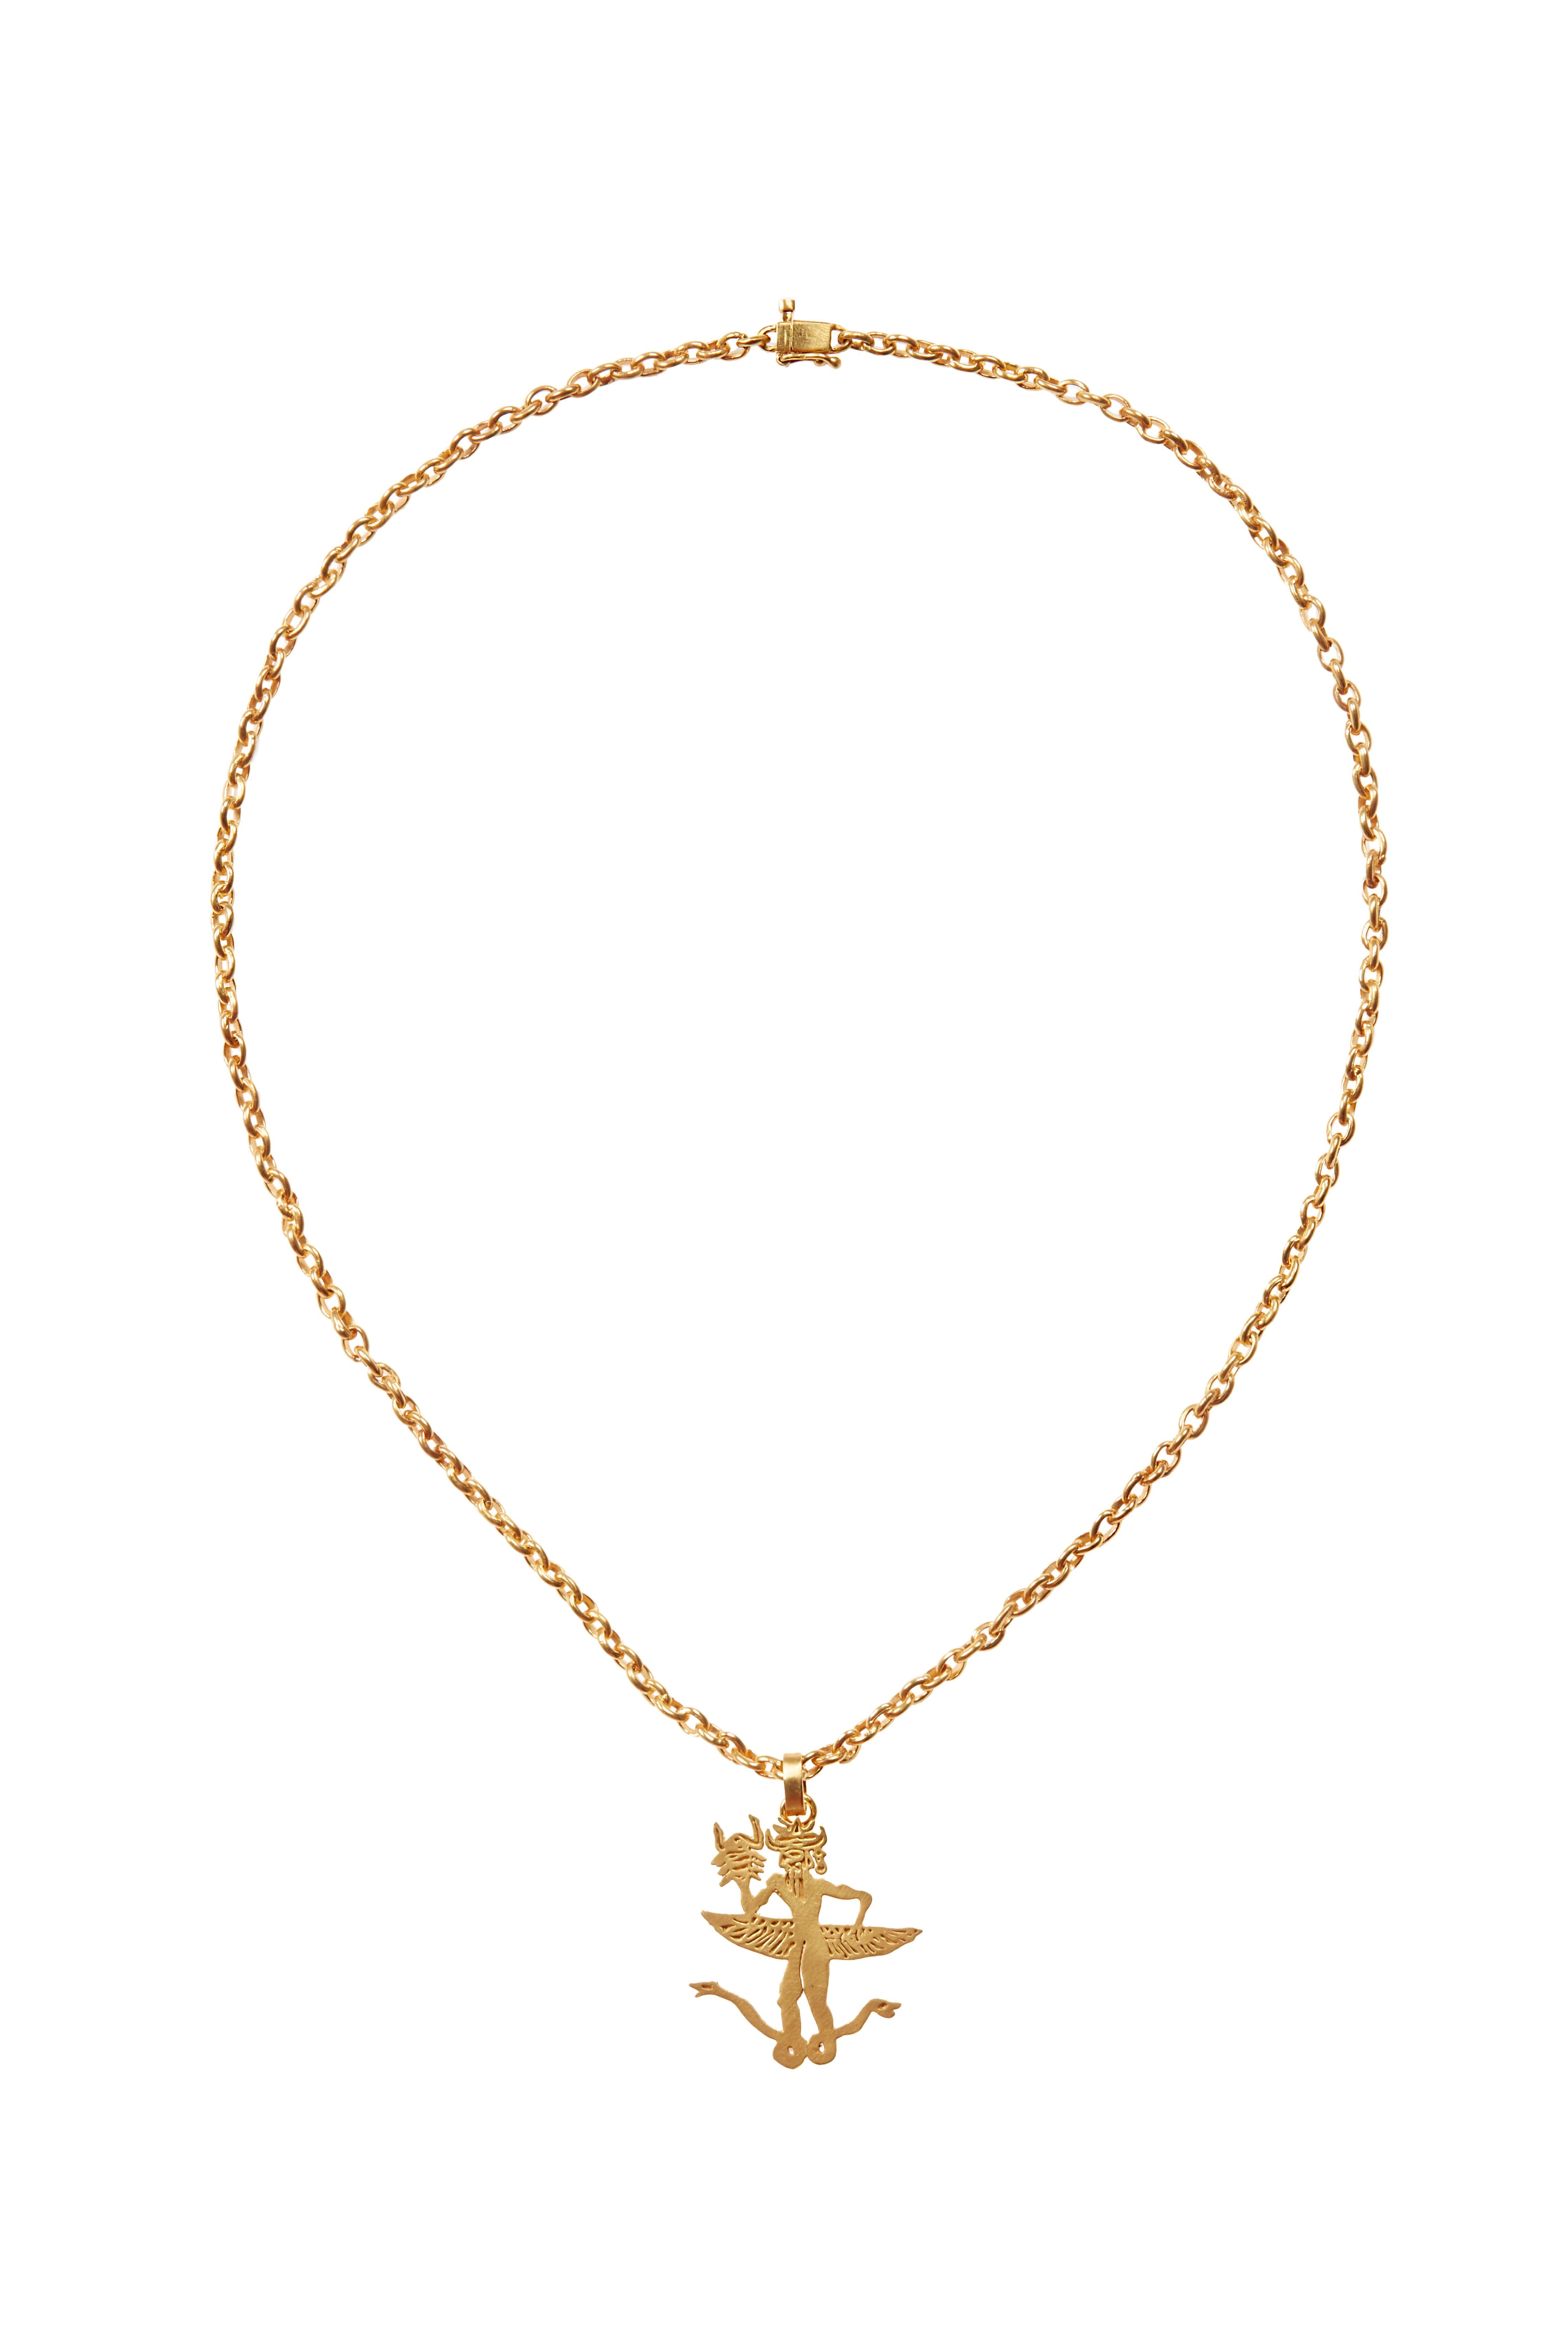 Darius Jewels Snake Charmer Pendant is crafted entirely by hand. Pendant is sold separately from chain. 

18K Yellow Gold

